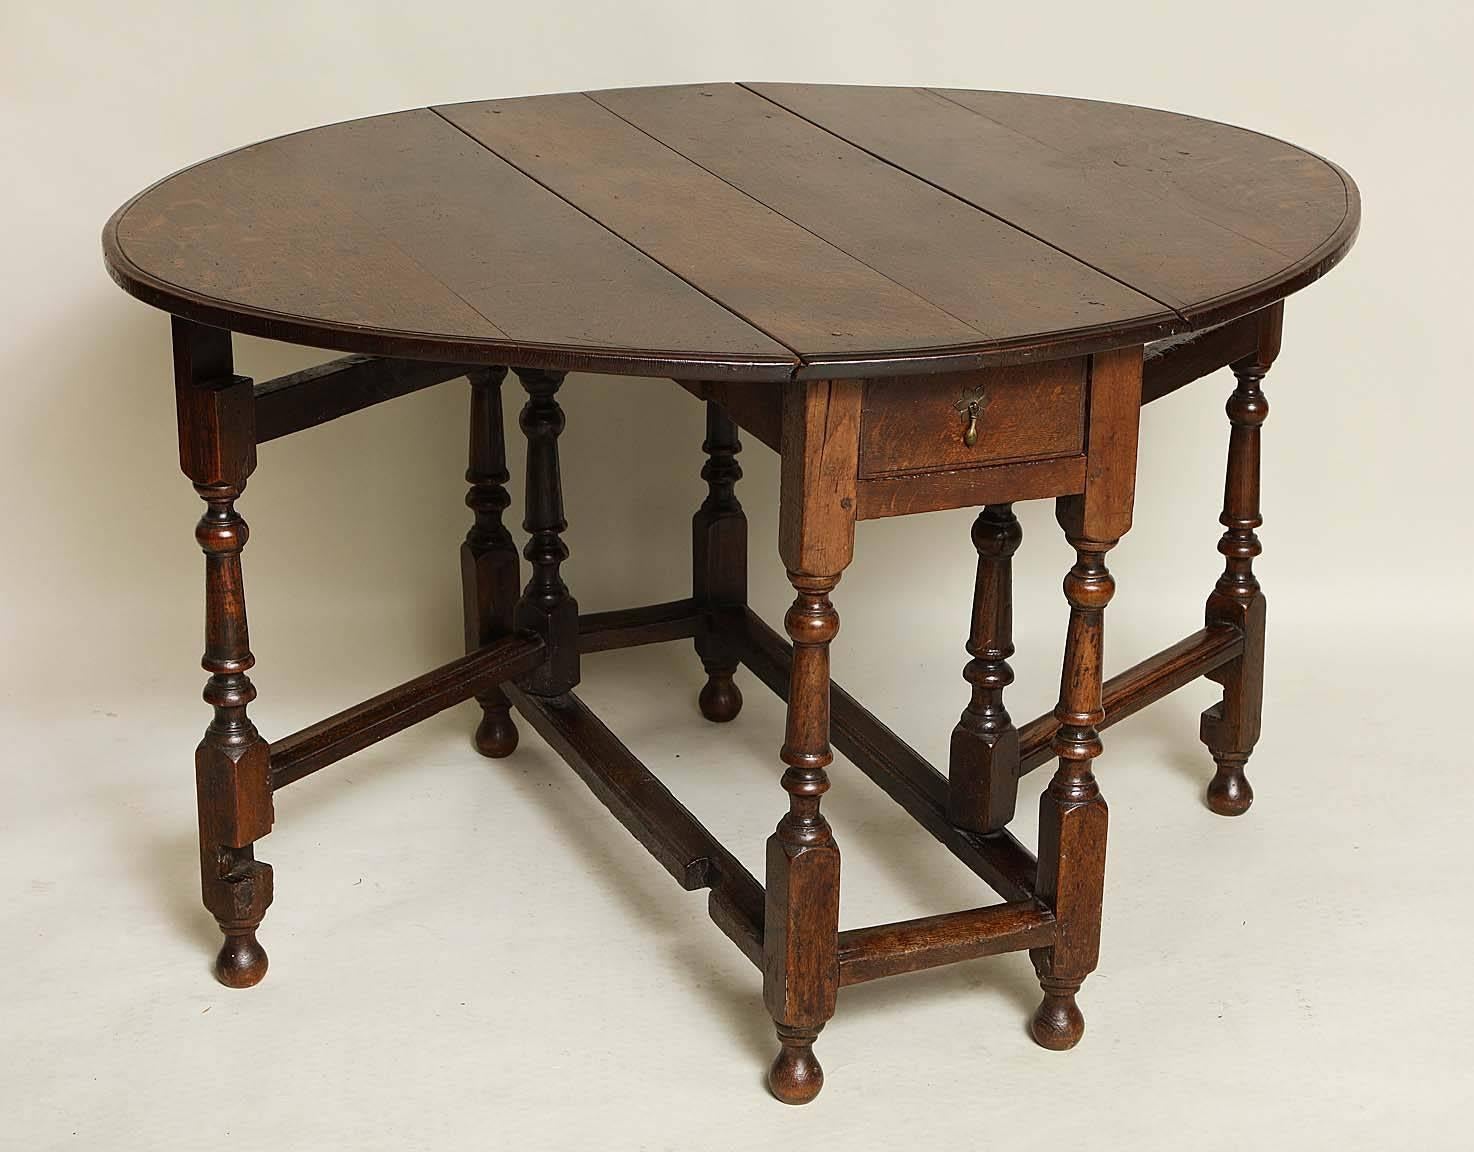 An early 18th century English oak gateleg table, the oval top with shallow ogee edge, the base with single drawer over balustrade turned legs with original bun feet and joined by molded stretcher, the whole with even mellow dark color.  The gateleg